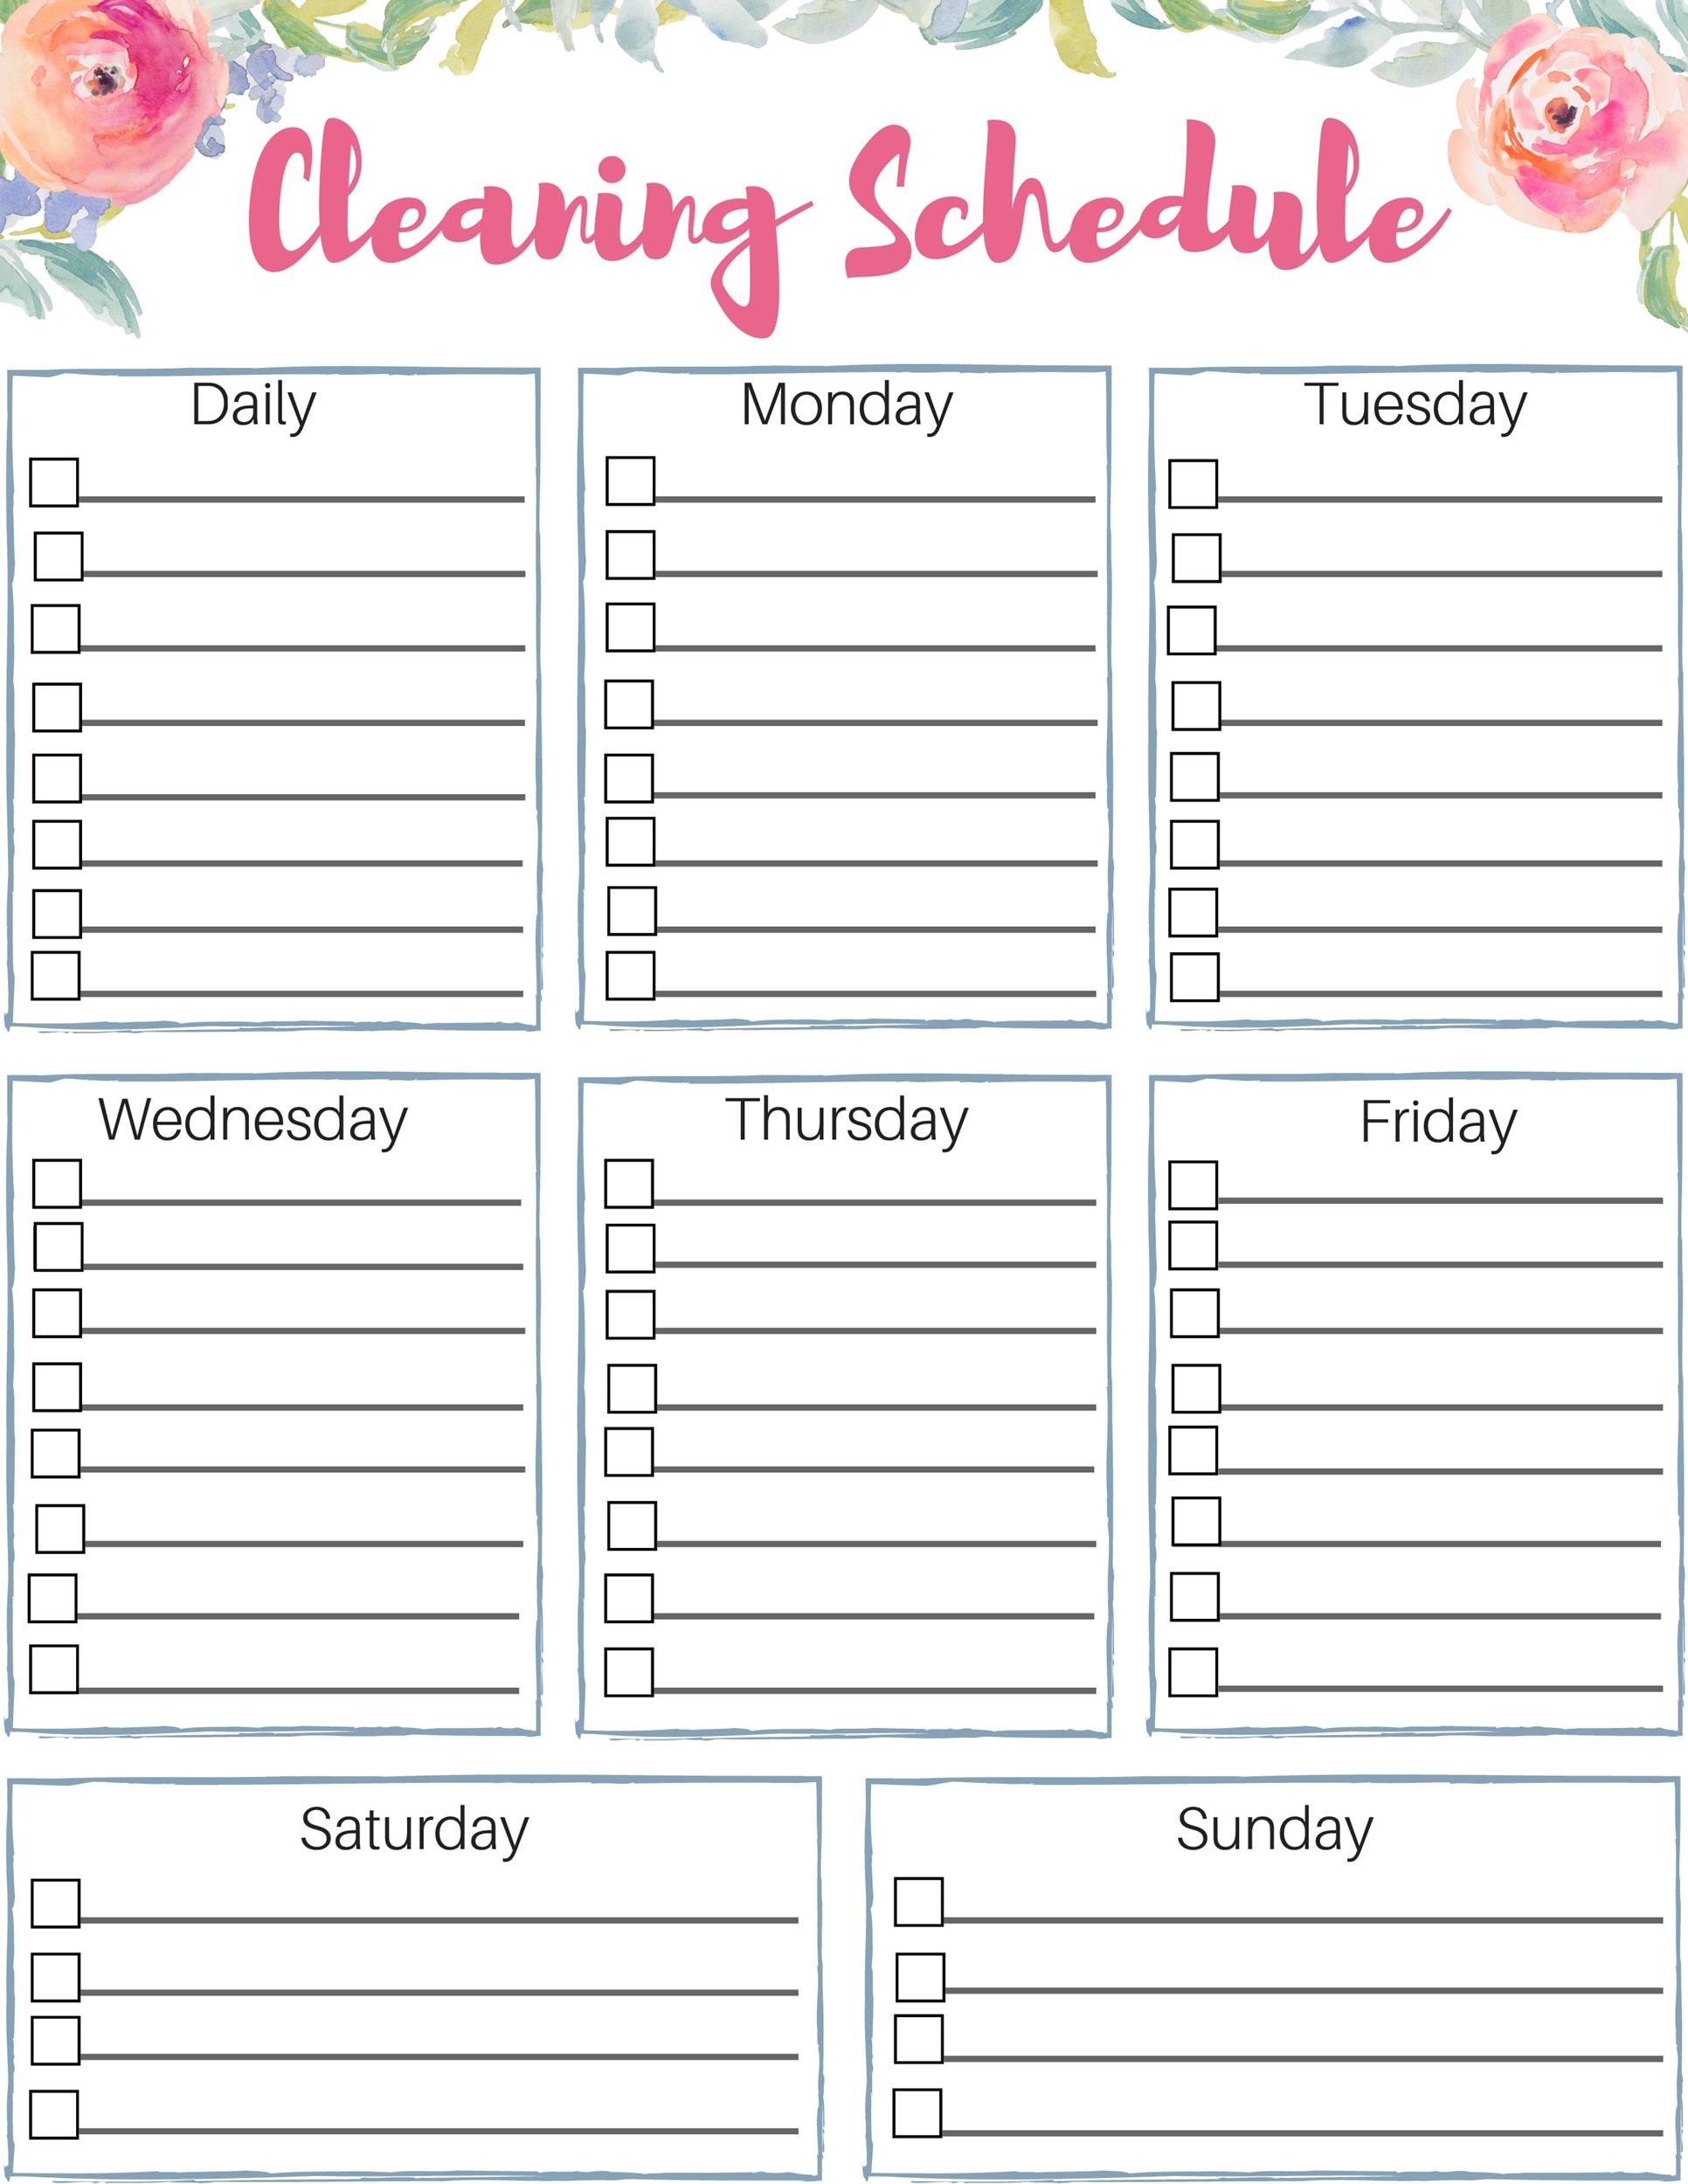 house-cleaning-schedule-weekly-cleaning-cleaning-chart-cleaning-schedule-printable